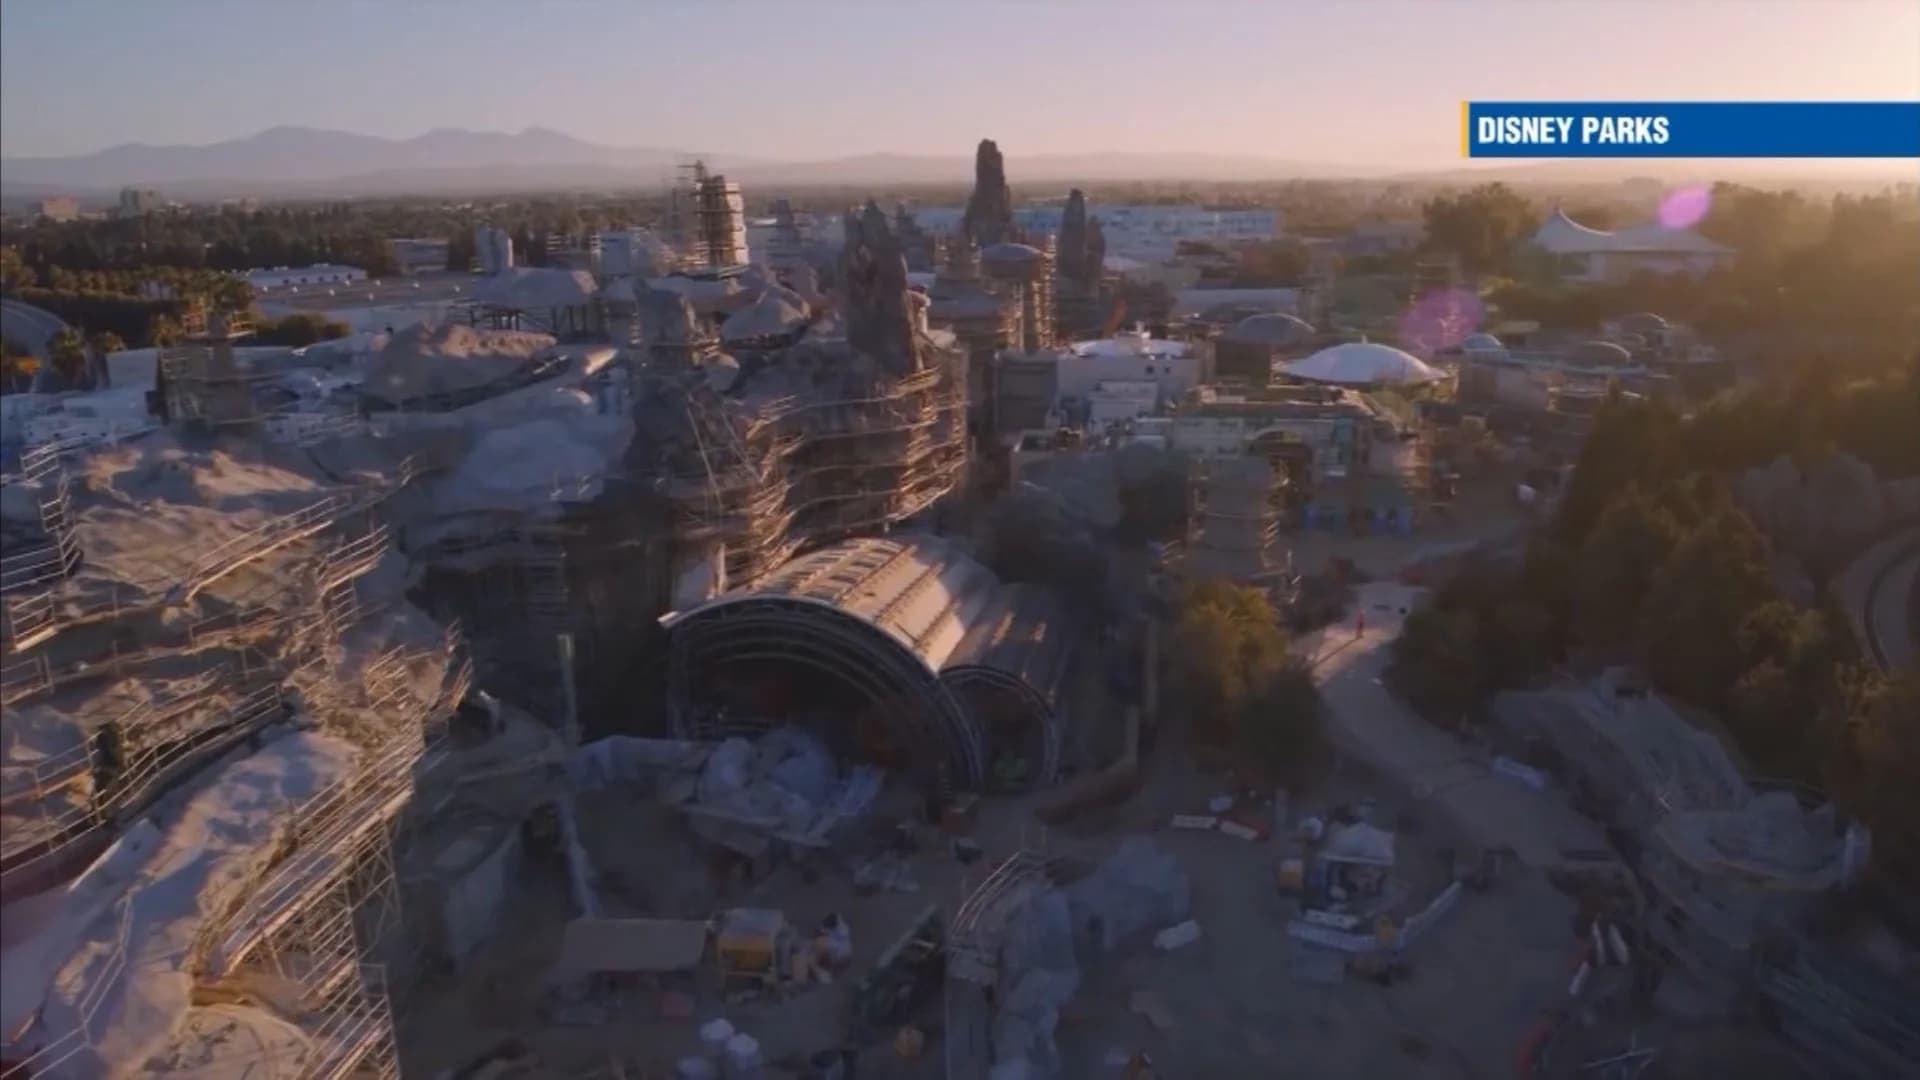 May the force be with Disney! – New Star Wars attractions to open earlier than planned